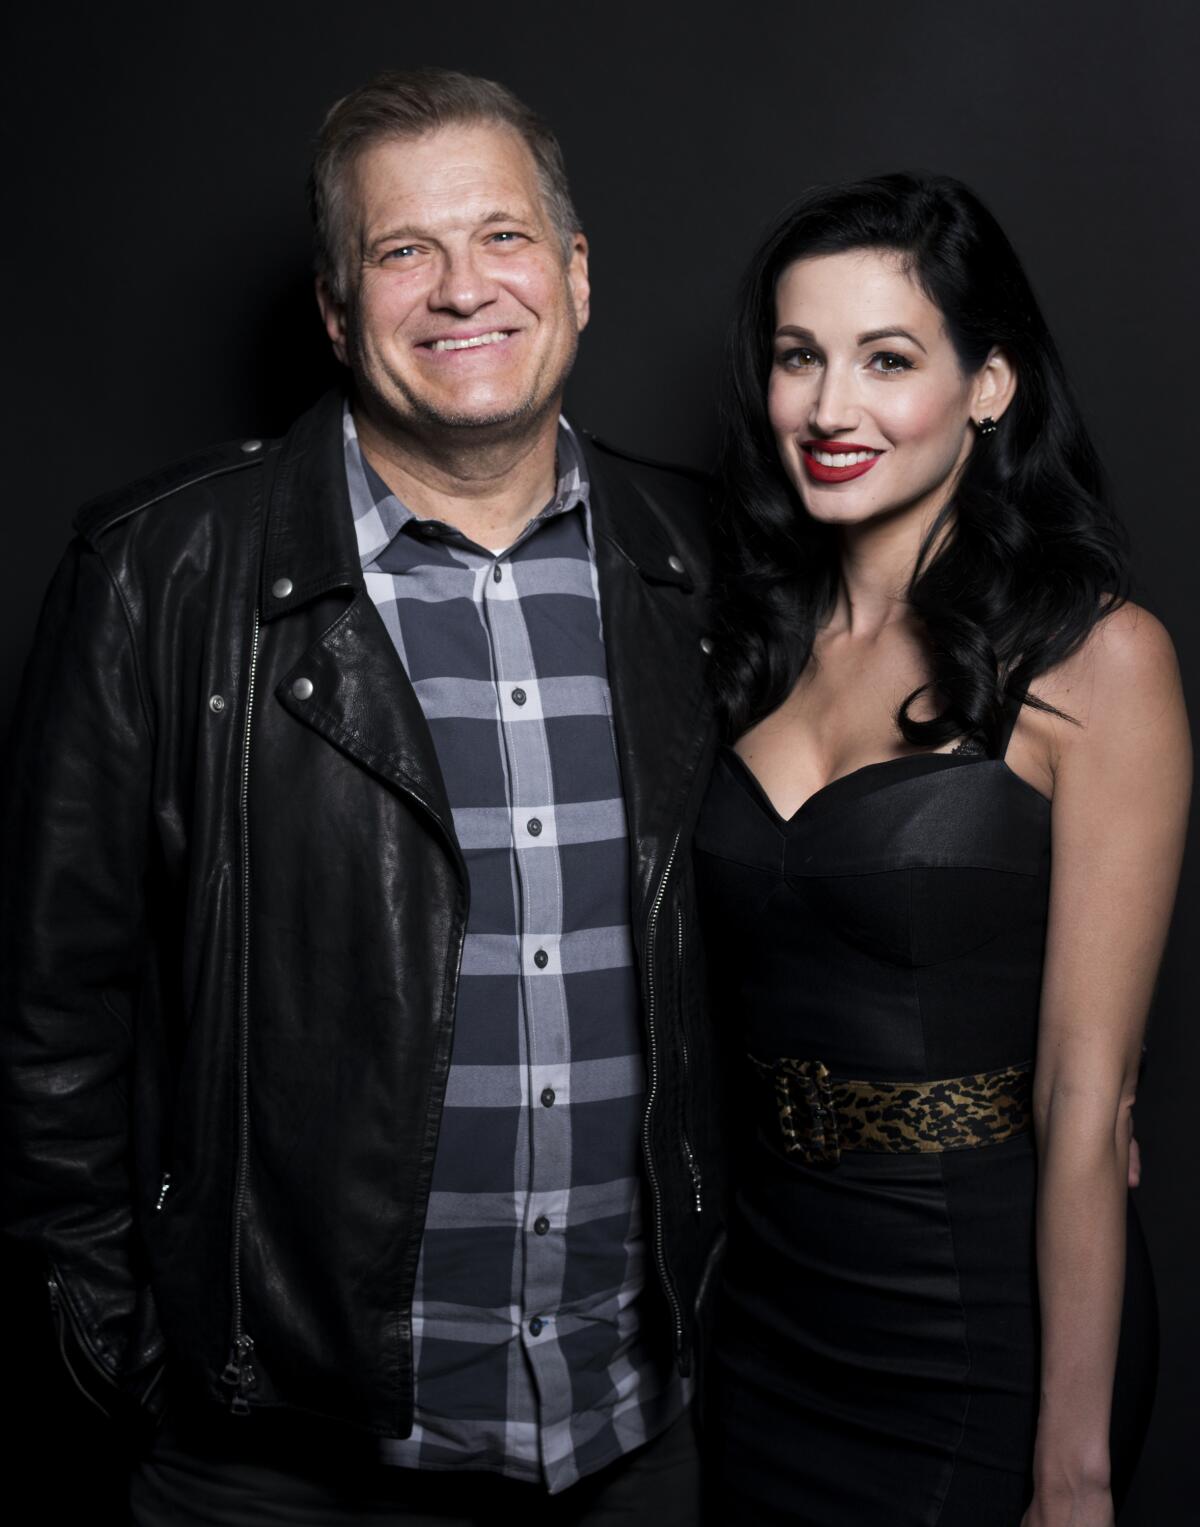 Drew Carey and Amie Harwick pose in 2017.